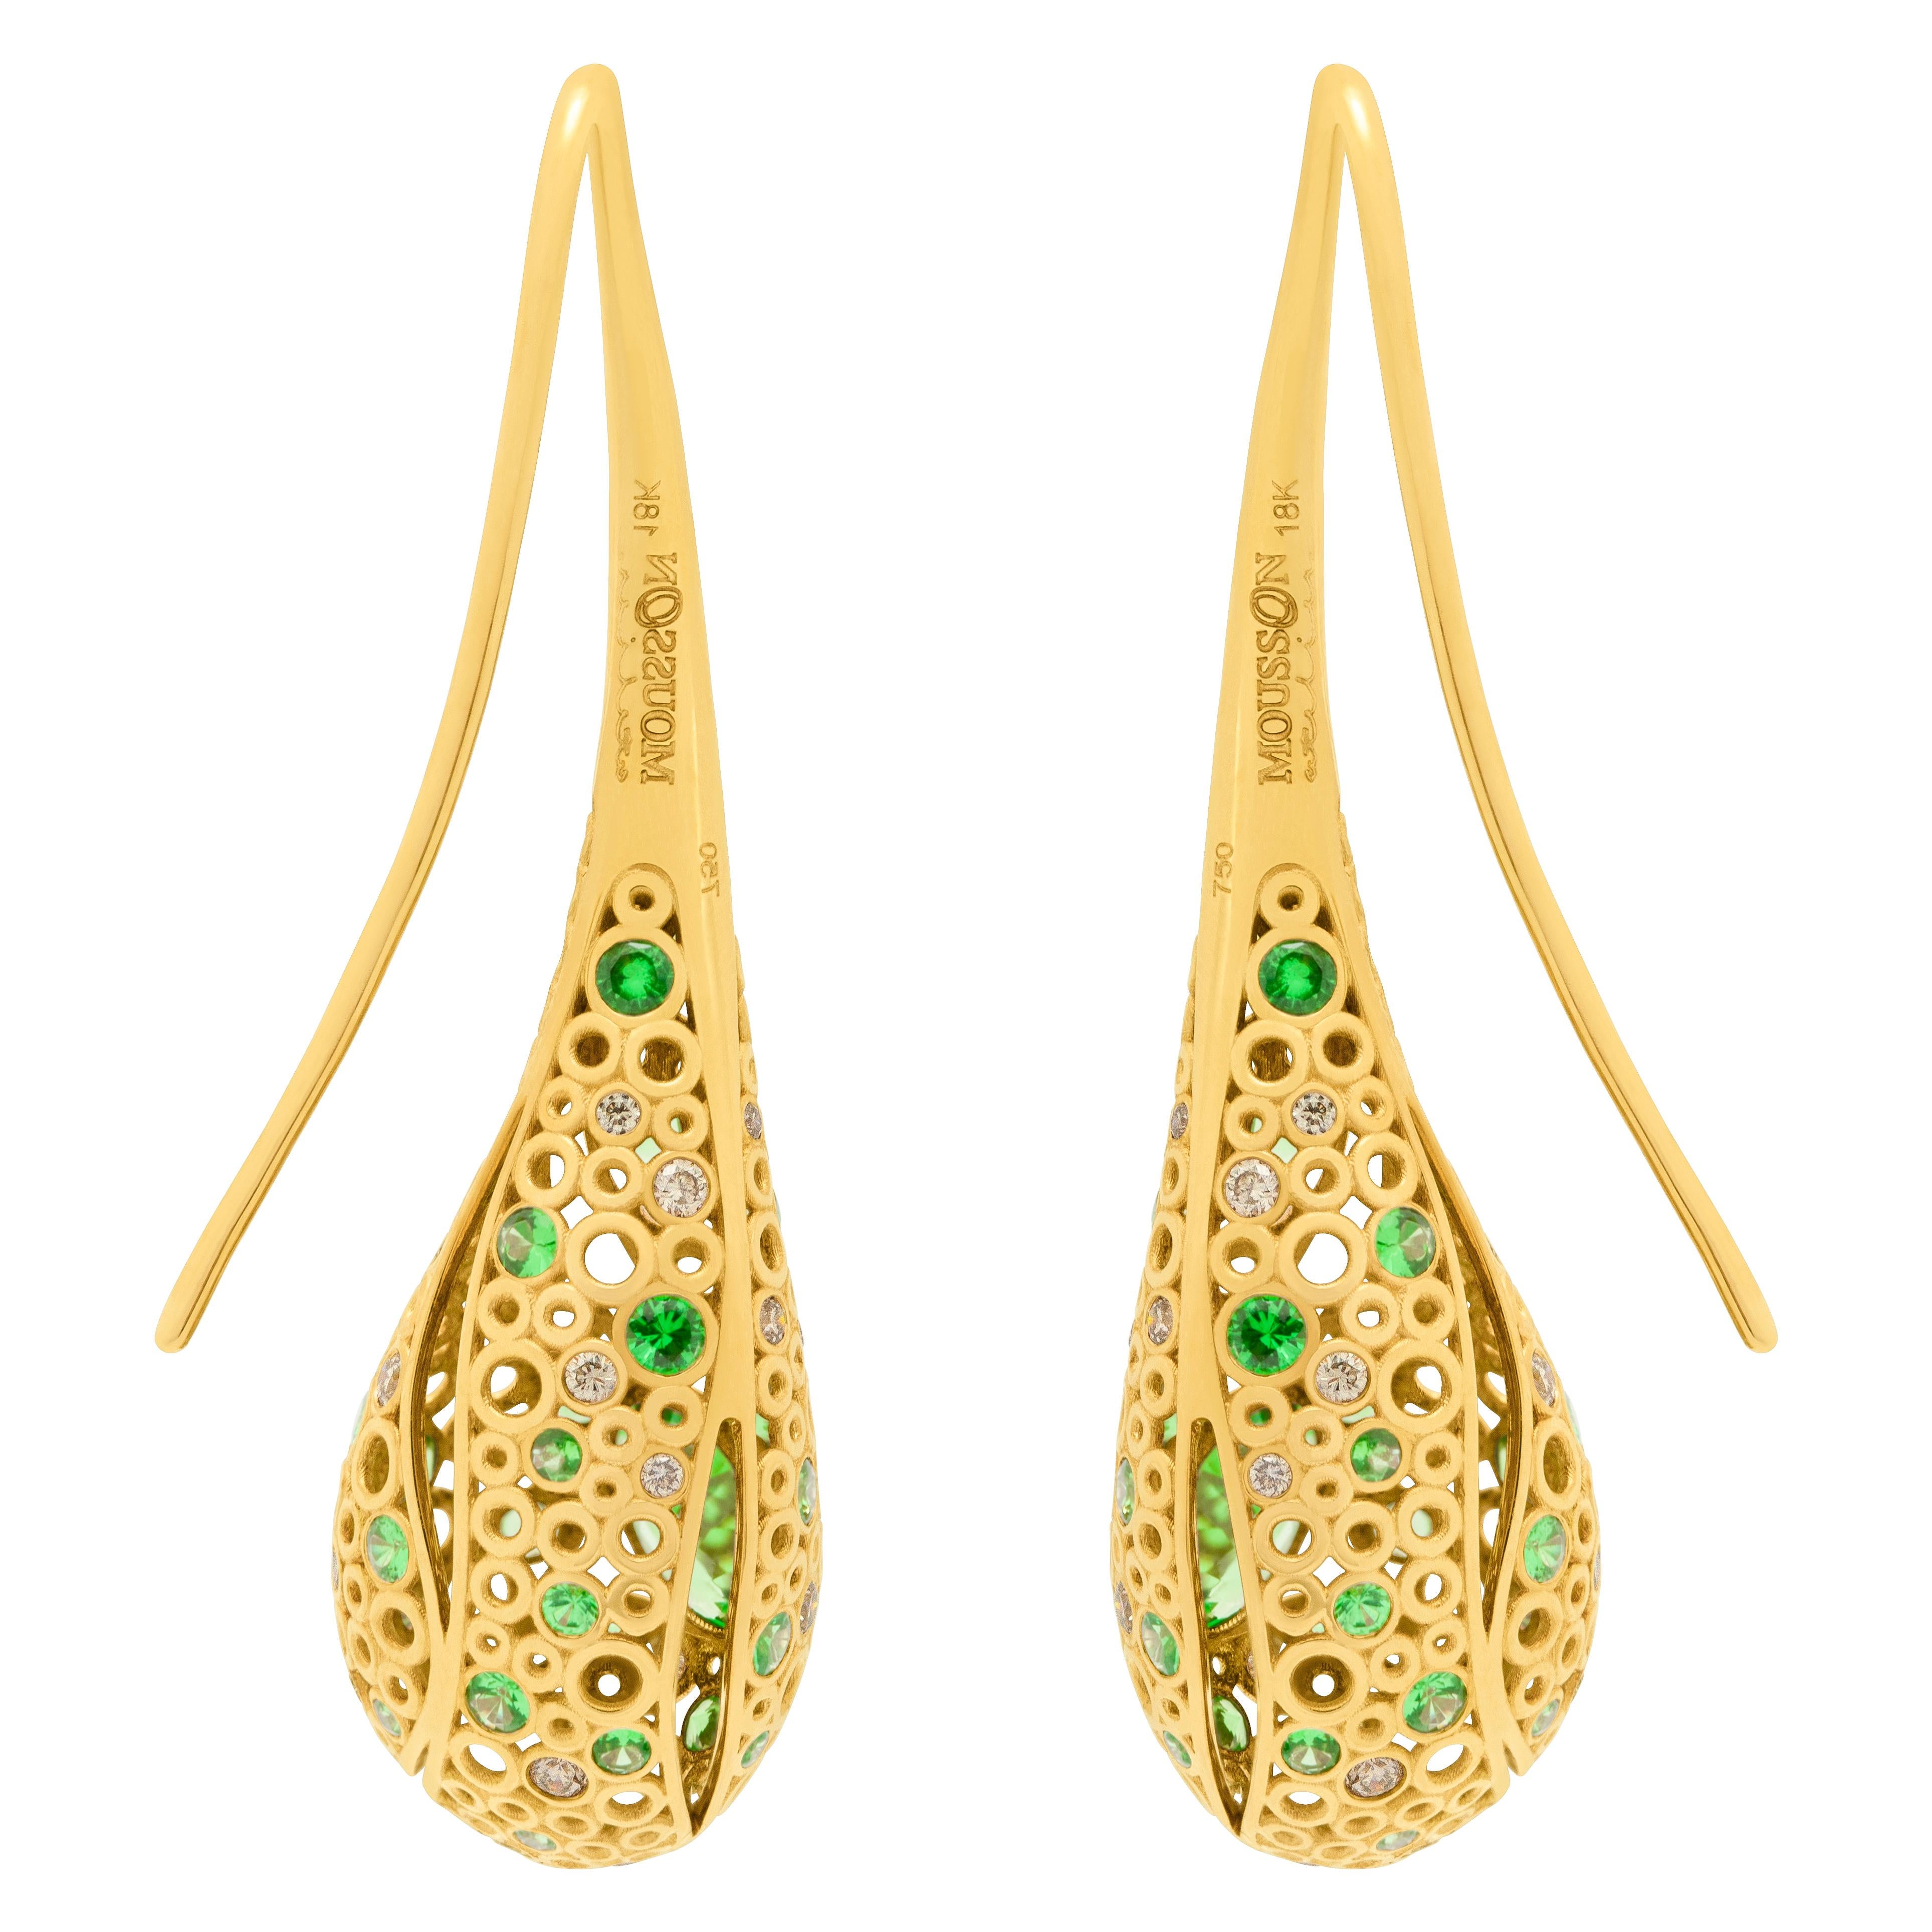 Tsavorites 0.89 Carat Champagne Diamonds 18 Karat Yellow Gold Bubble Earrings
Incredibly light and airy Earrings from our Bubbles Collection. Yellow 18 Karat Gold is made in the form of variety of small bubbles, some of which have 60 Tsavorites and